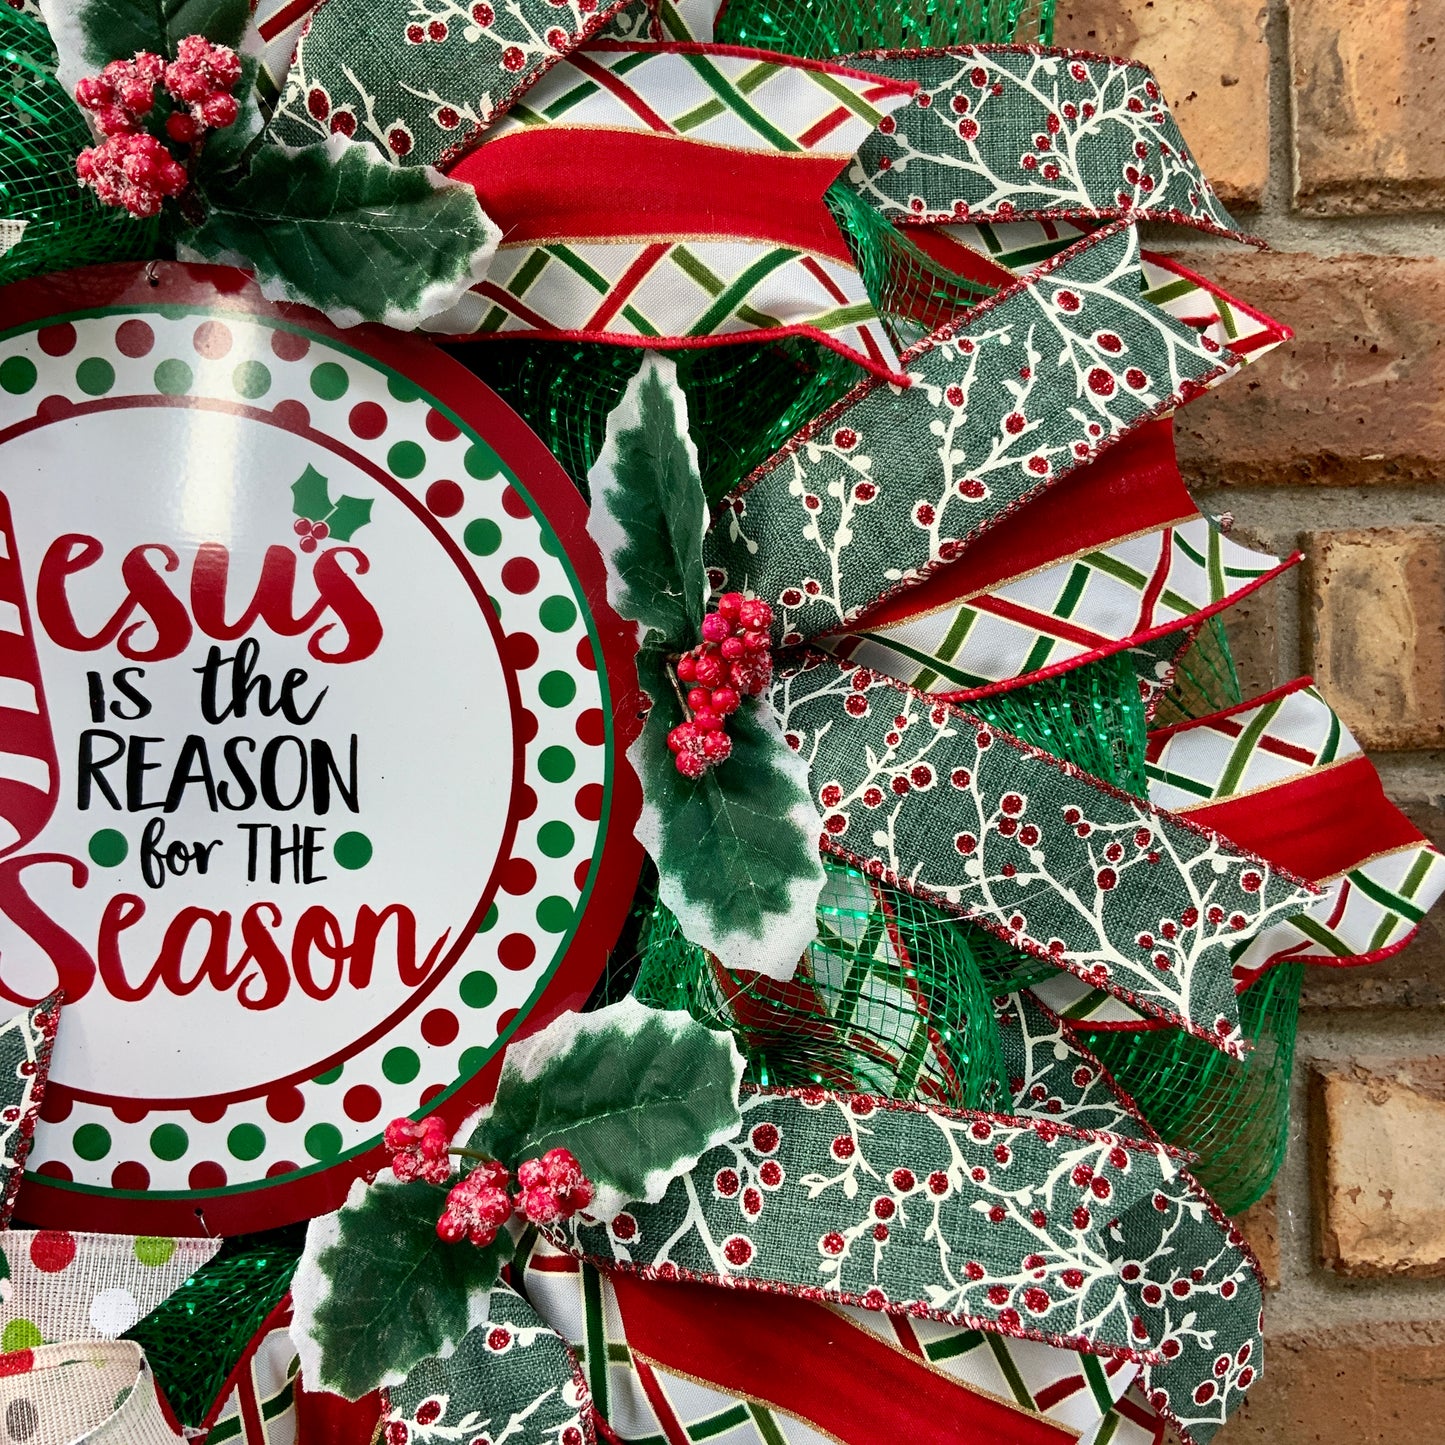 Jesus Is The Reason For The Season Wreath, Christmas Wreath, Christmas Pancake Wreath, Traditional Christmas Wreath, Religious Christmas Wreath